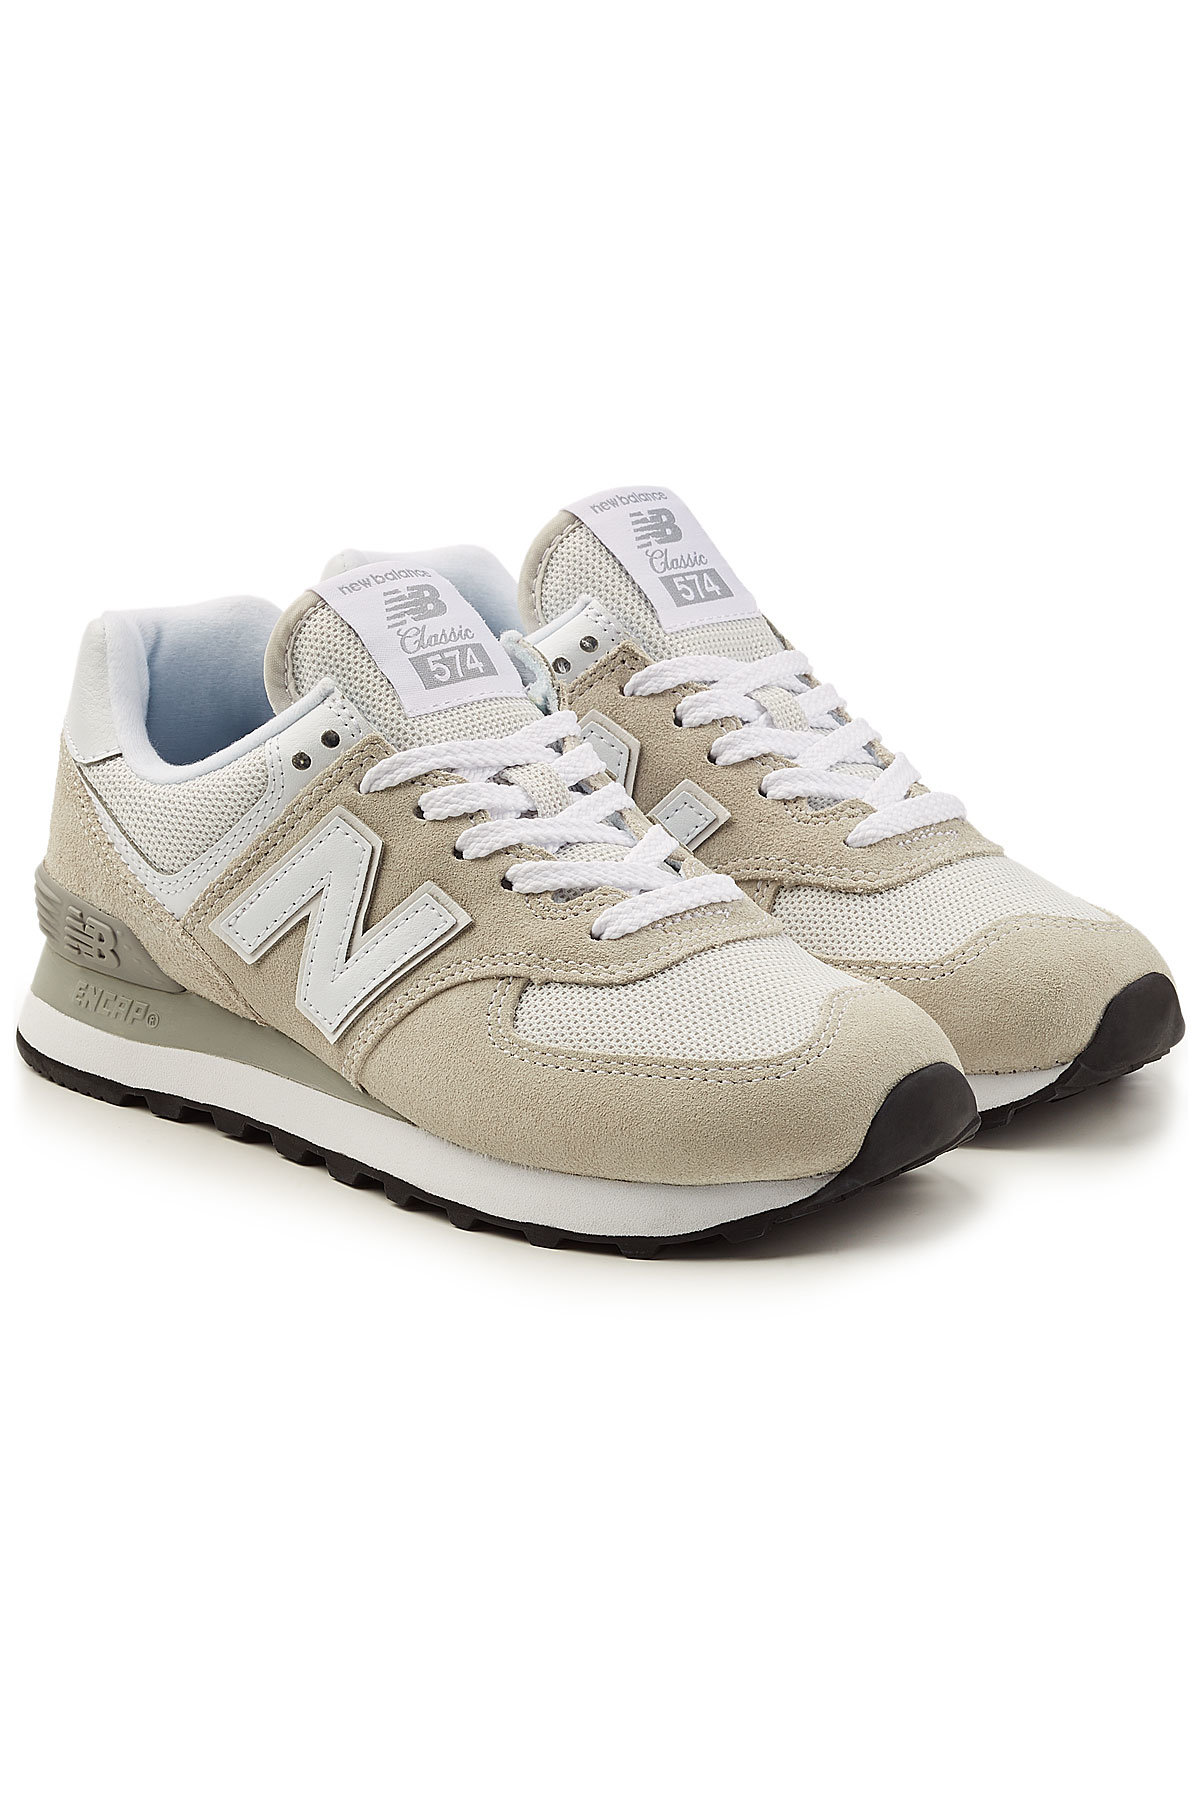 WL574B Sneakers with Suede and Mesh by New Balance